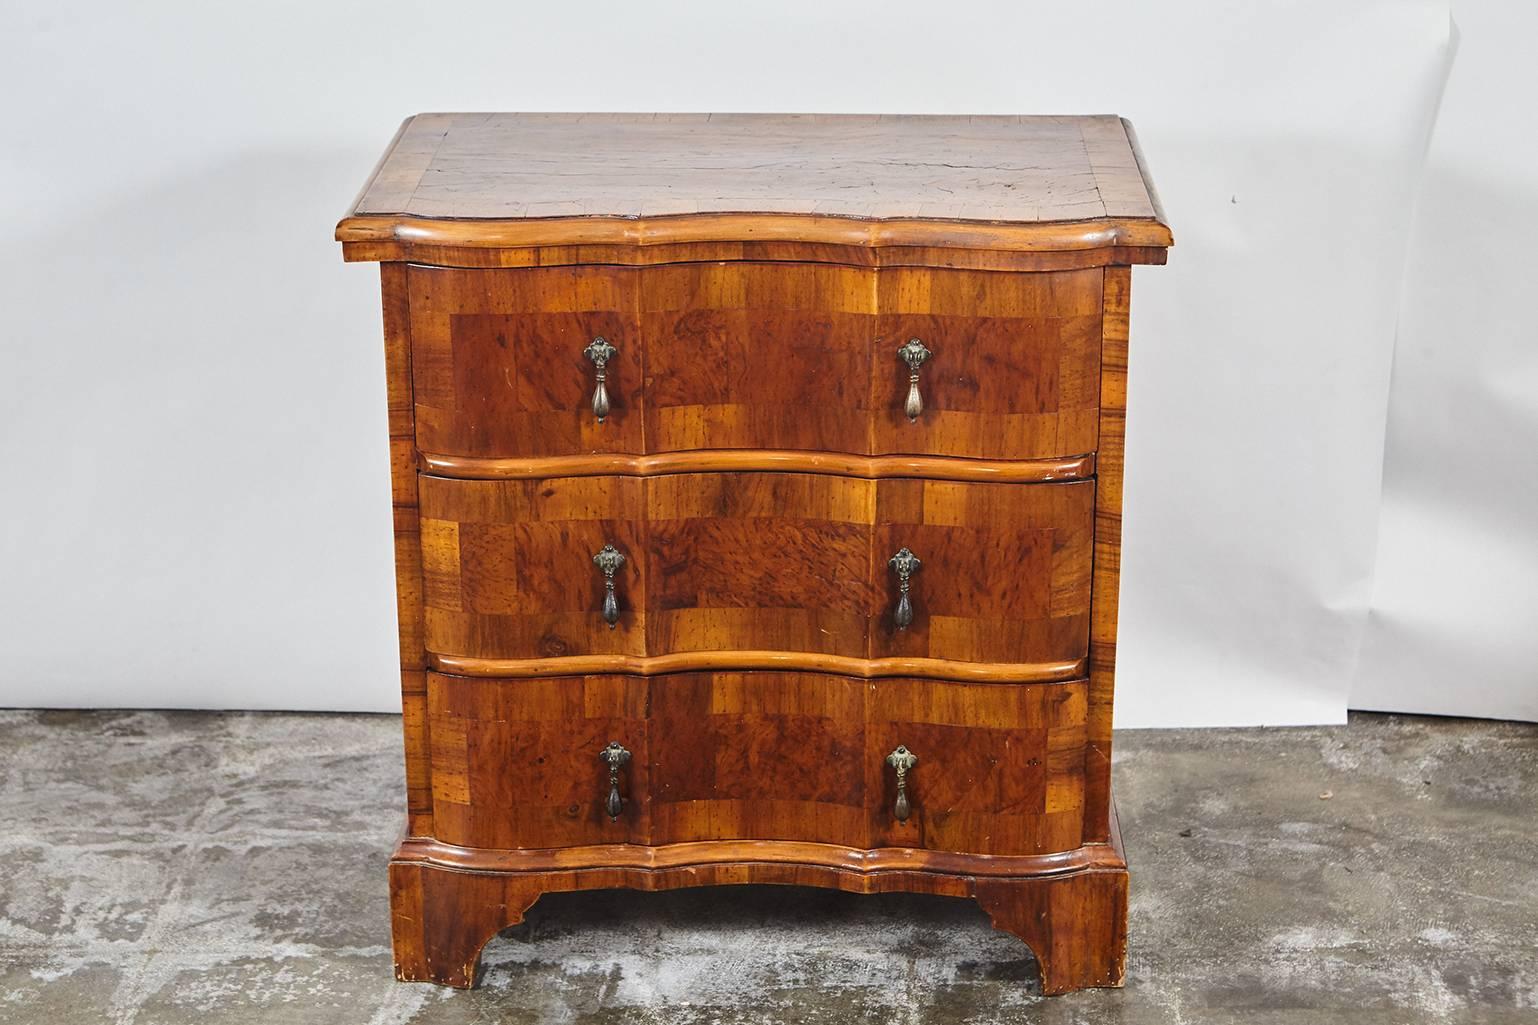 This pair of beautifully veneered serpentine front nightstands have three drawers and brass drop handles. The nightstands have paneled sides, wide banding on the surface top and sit on four shaped feet paneled sides.